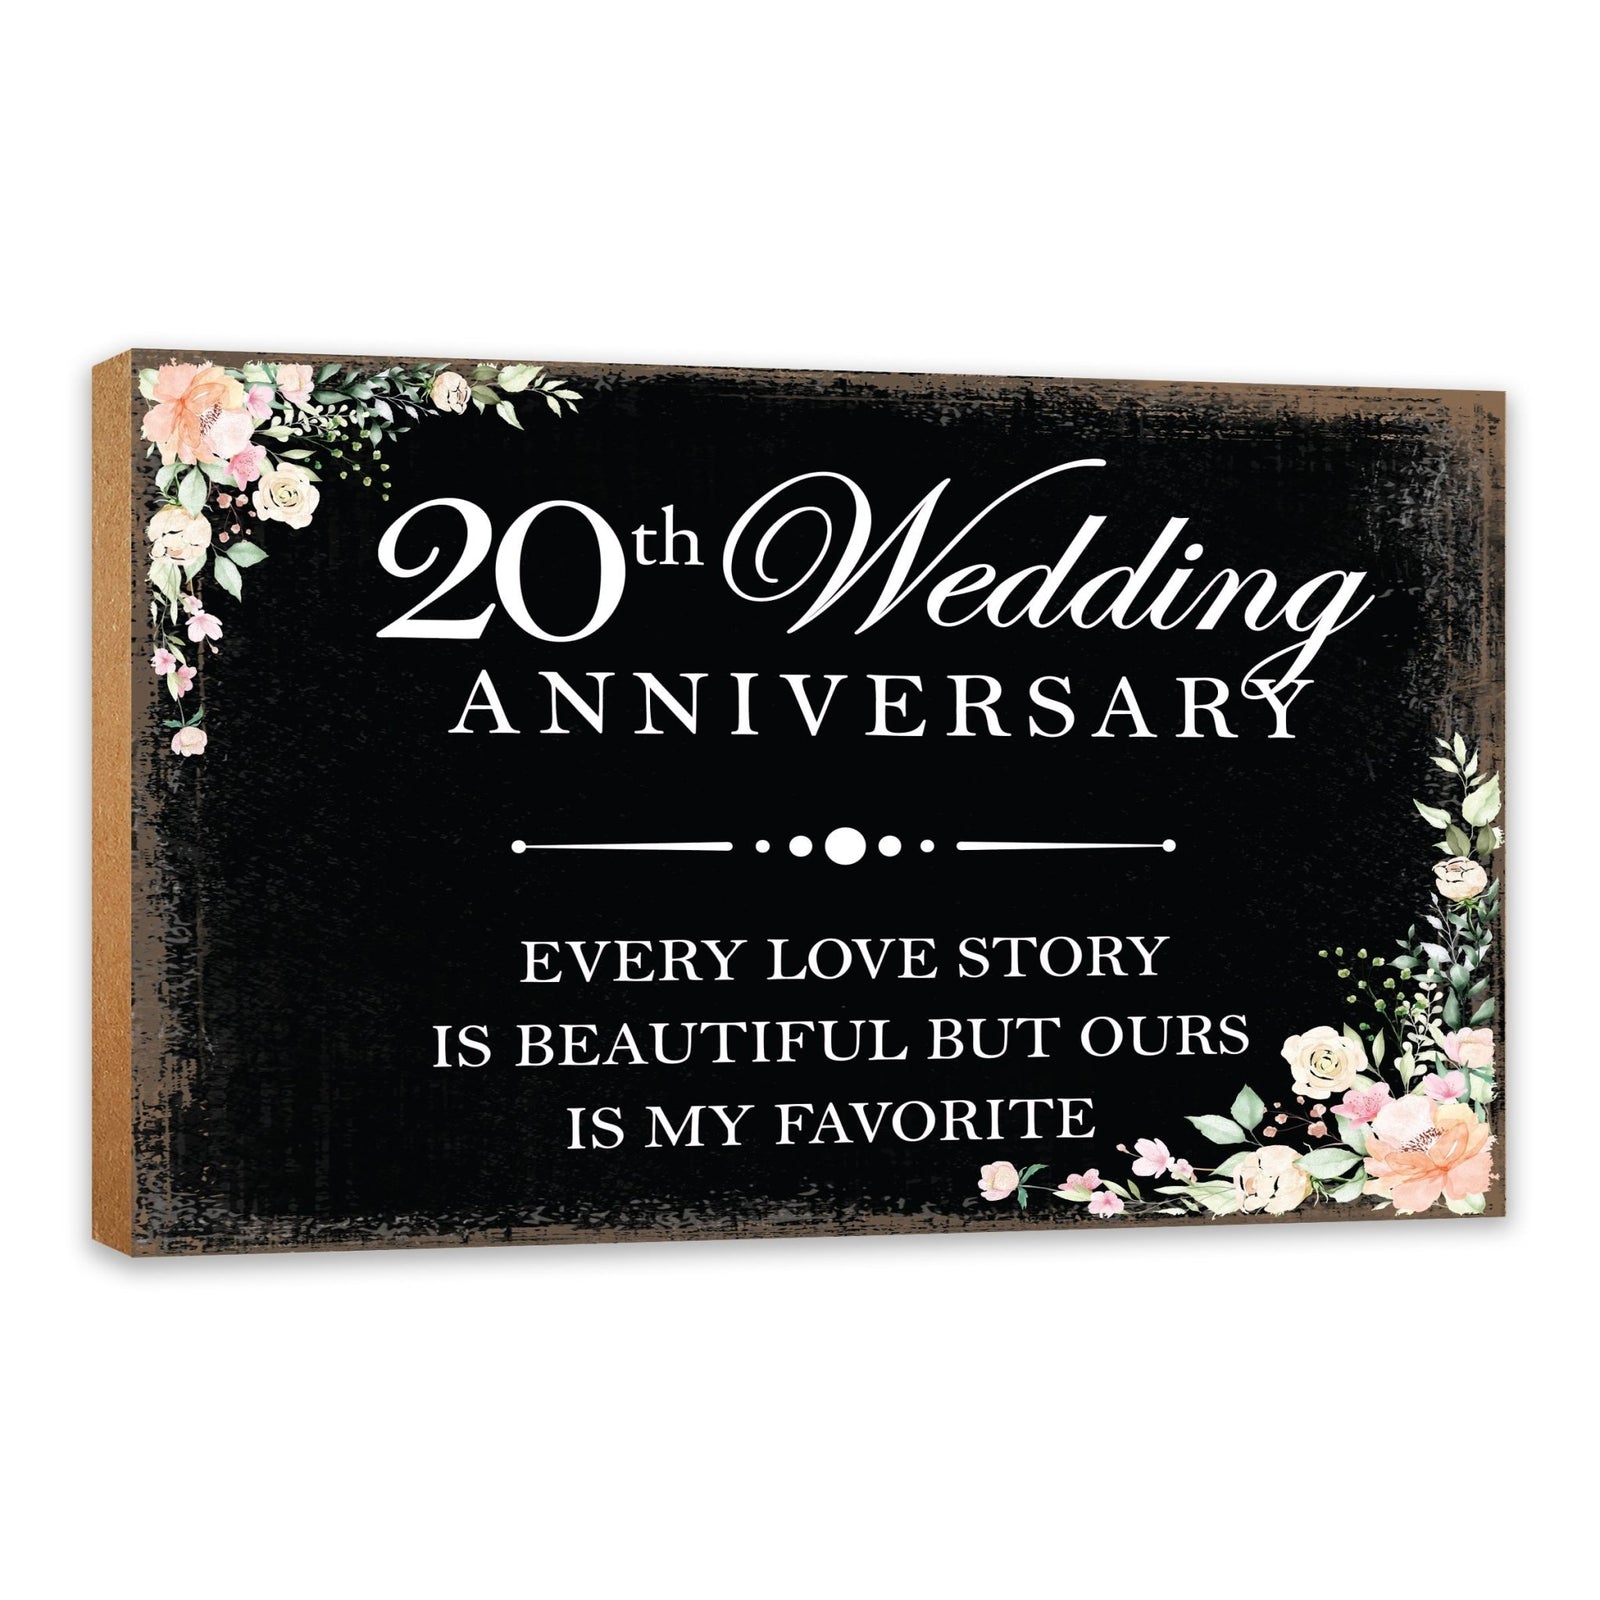 20th Wedding Anniversary Unique Shelf Decor and Tabletop Signs Gifts for Couples - Every Love Story - LifeSong Milestones